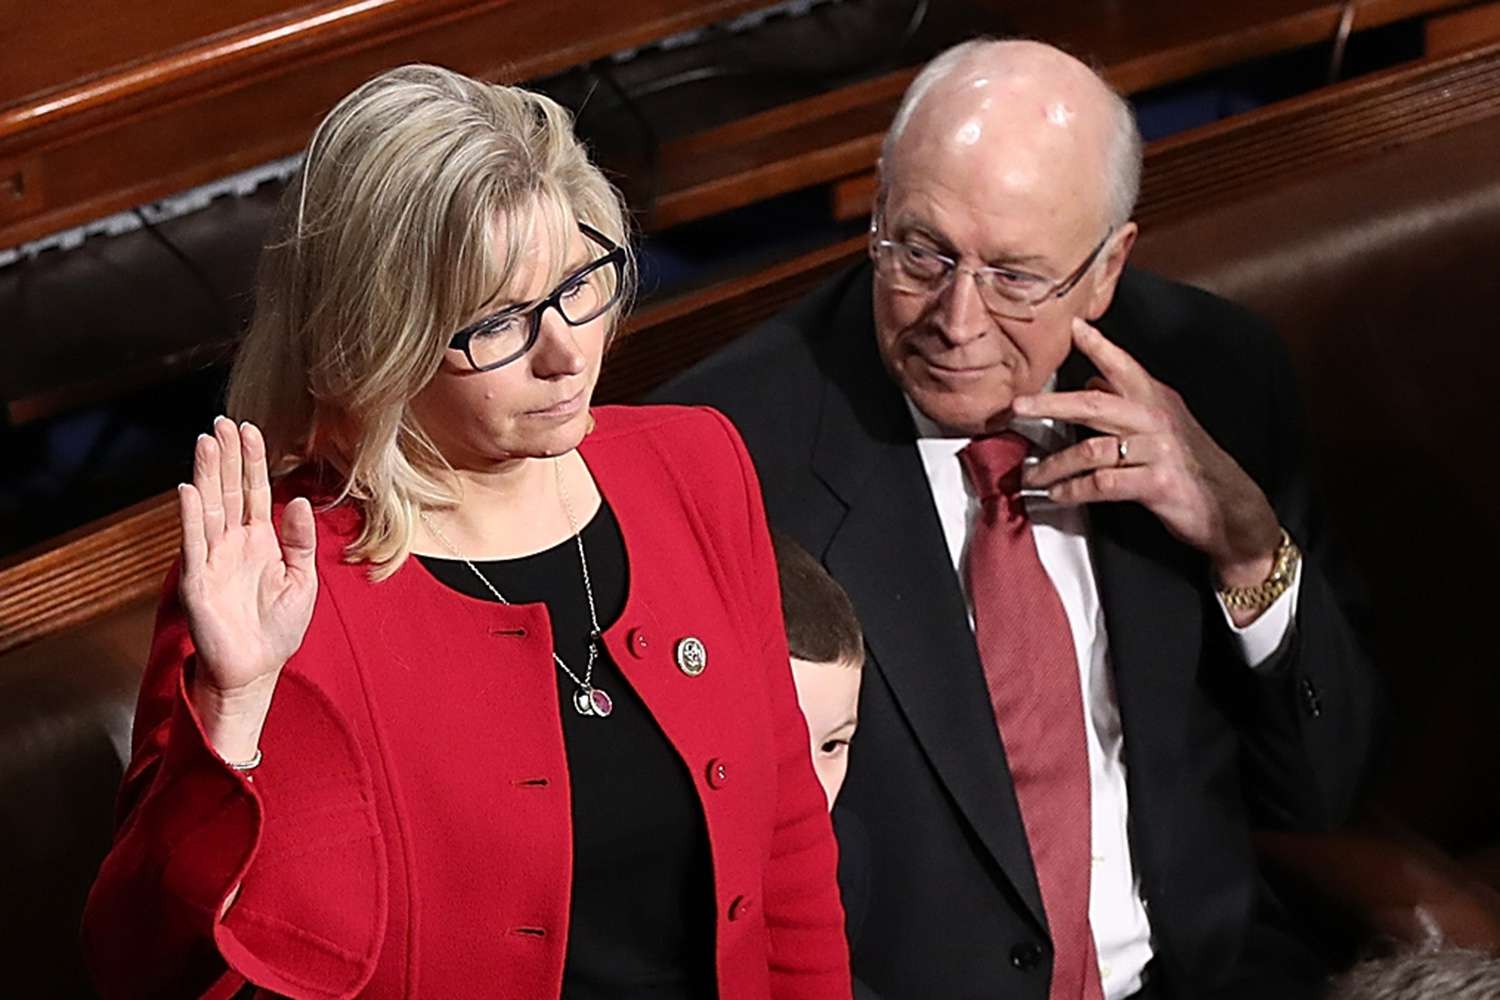 Liz and Dick Cheney Were the Only Republicans to Attend the House's Anniversary Observance of Jan. 6 骚乱